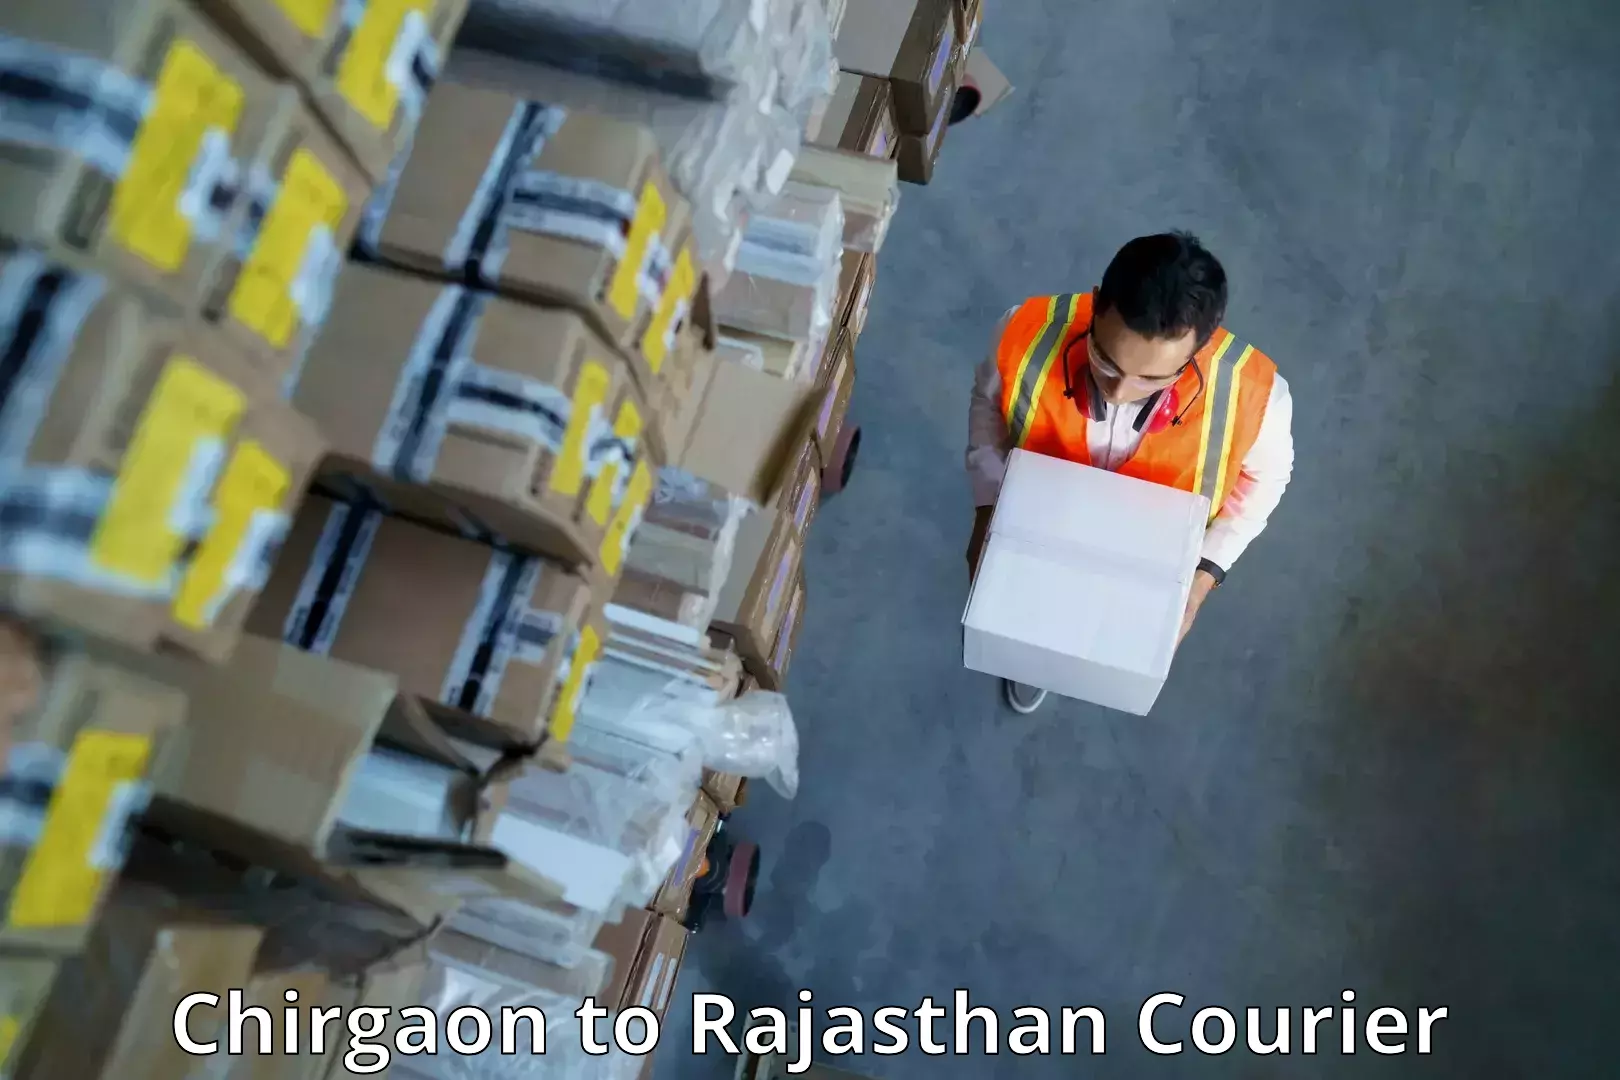 Next-day delivery options Chirgaon to Karauli